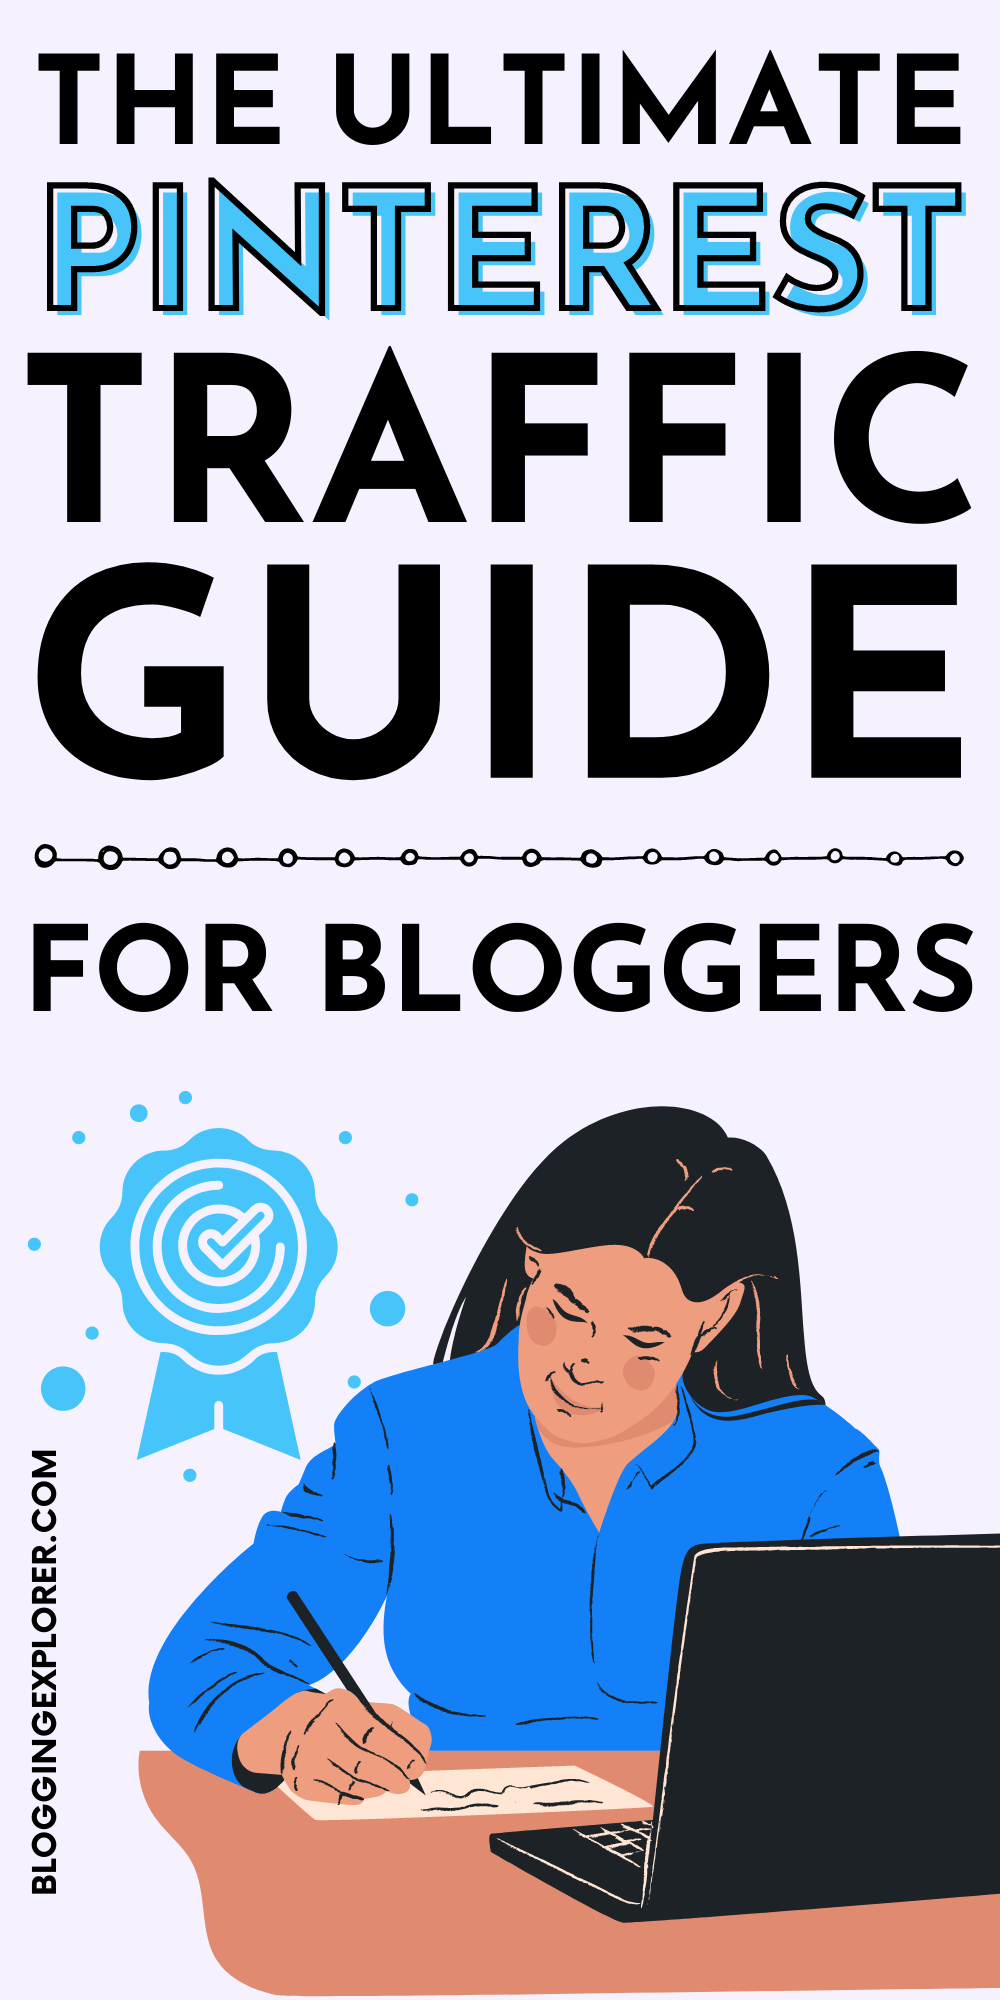 The ultimate Pinterest traffic guide for bloggers